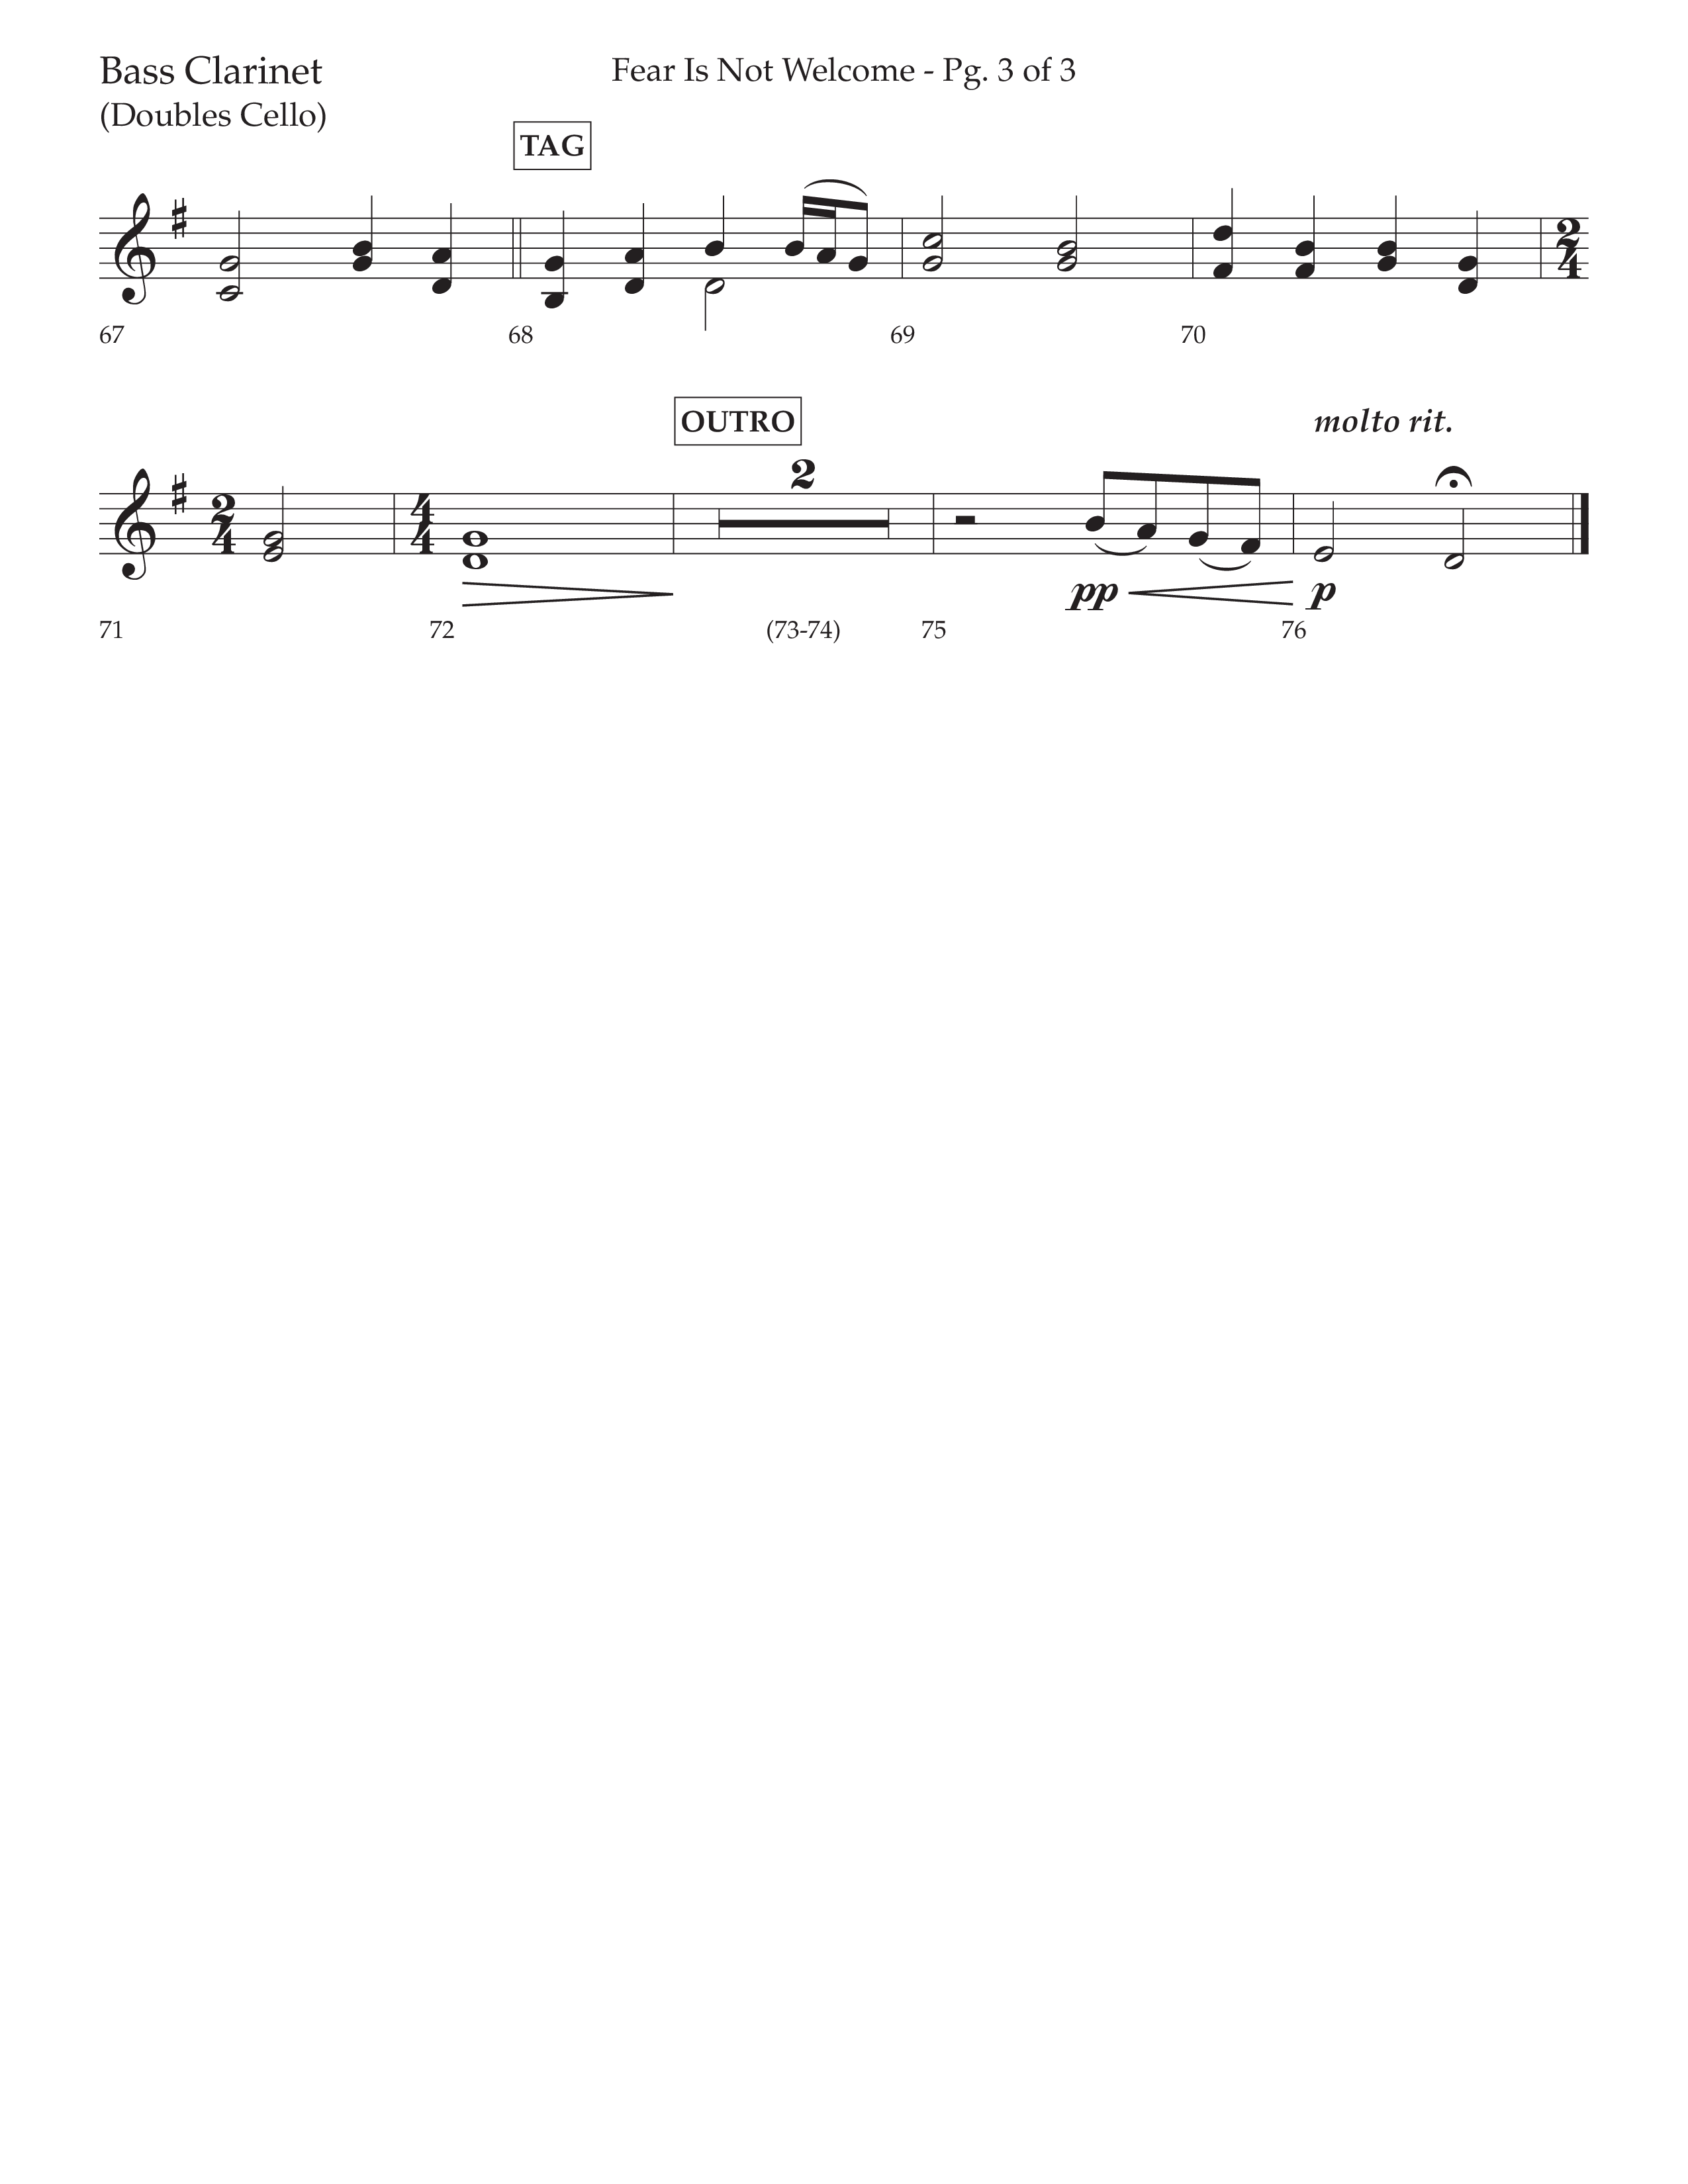 Fear Is Not Welcome (Choral Anthem SATB) Bass Clarinet (Lifeway Choral / Arr. Cliff Duren)